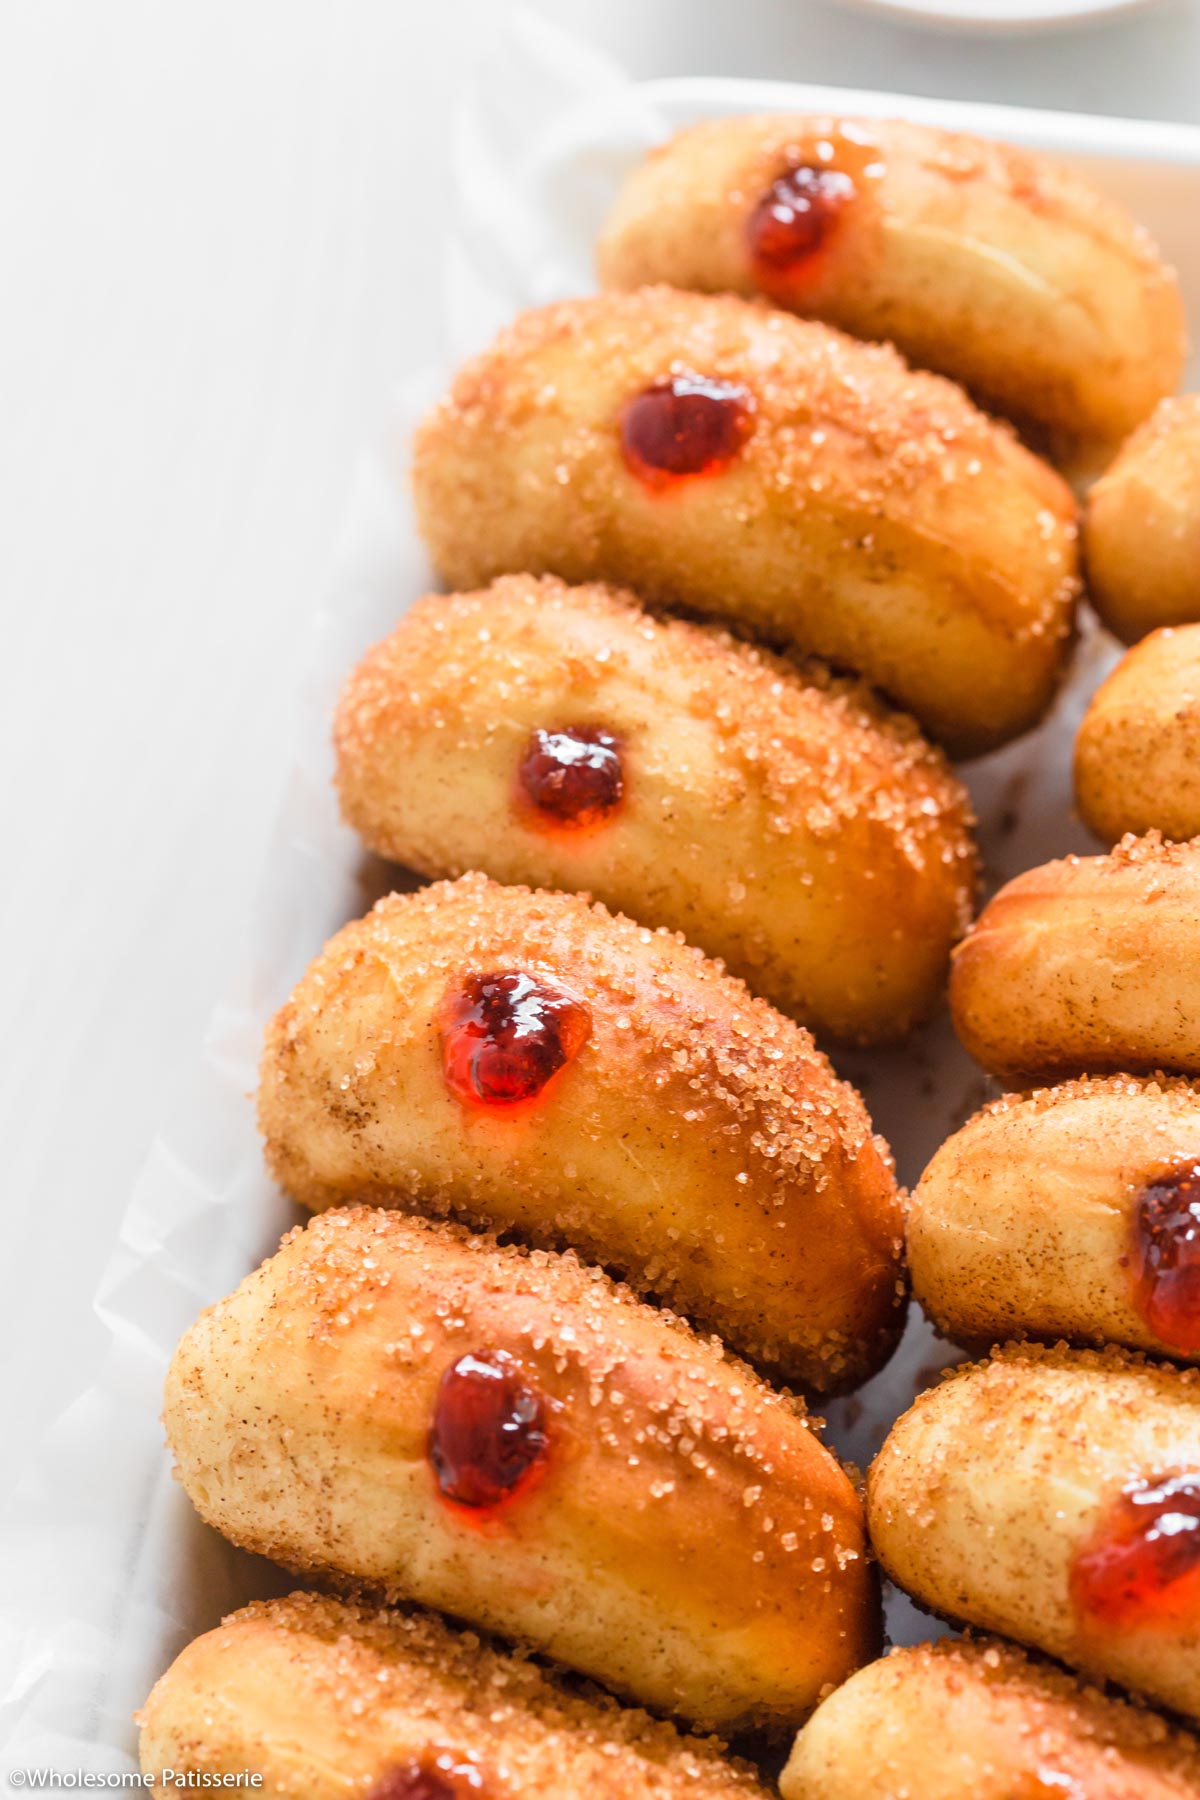 Filling each doughnut with the jam.